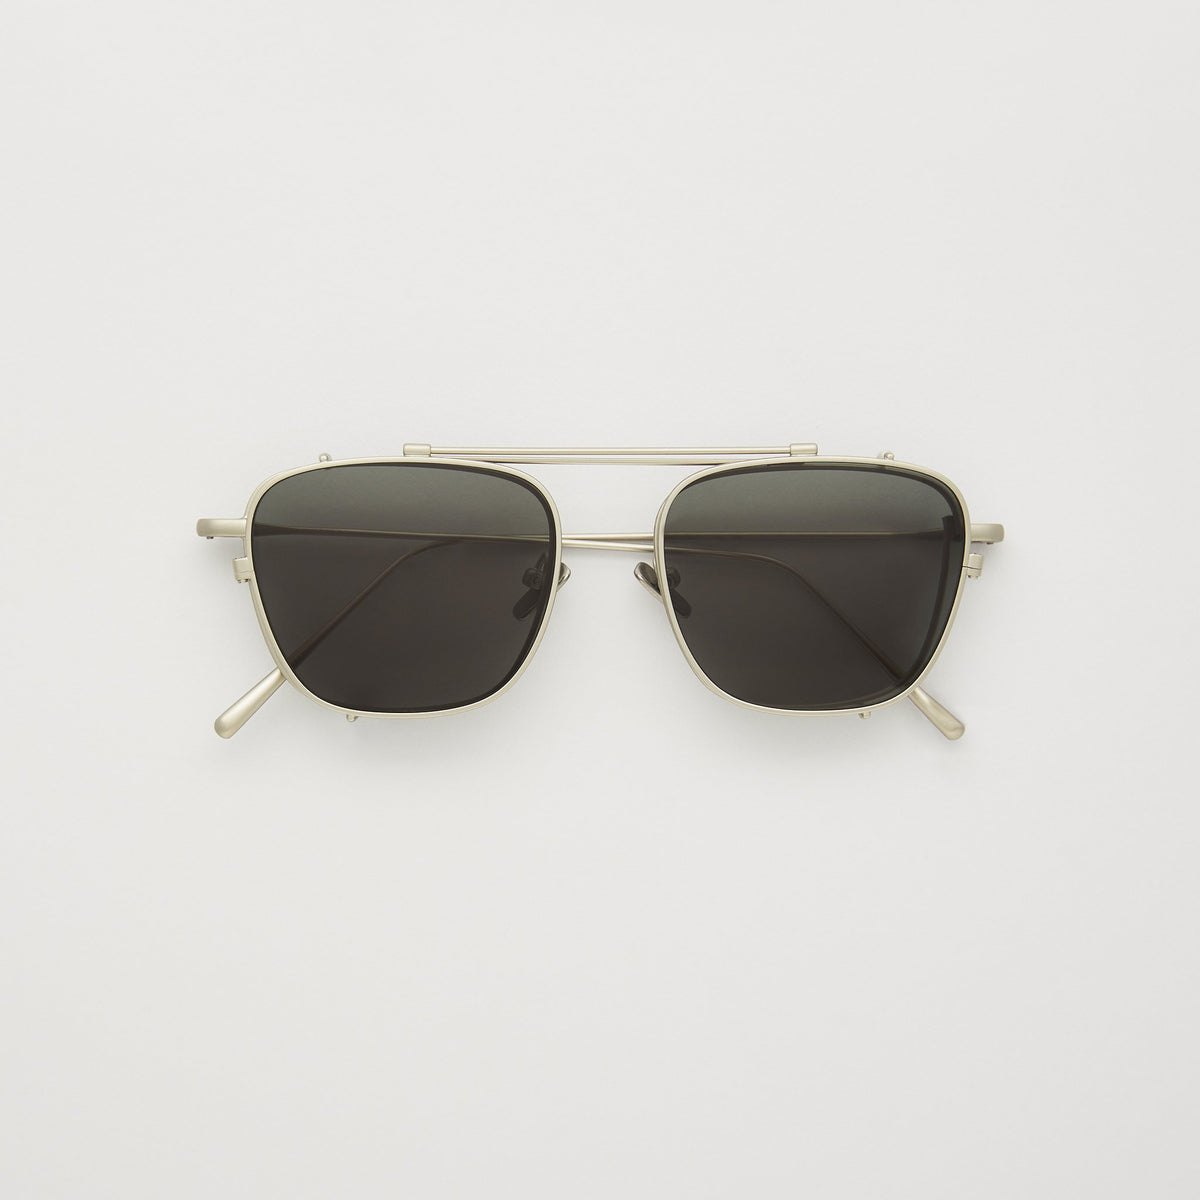 Collier Clip-on sunglasses | Cubitts